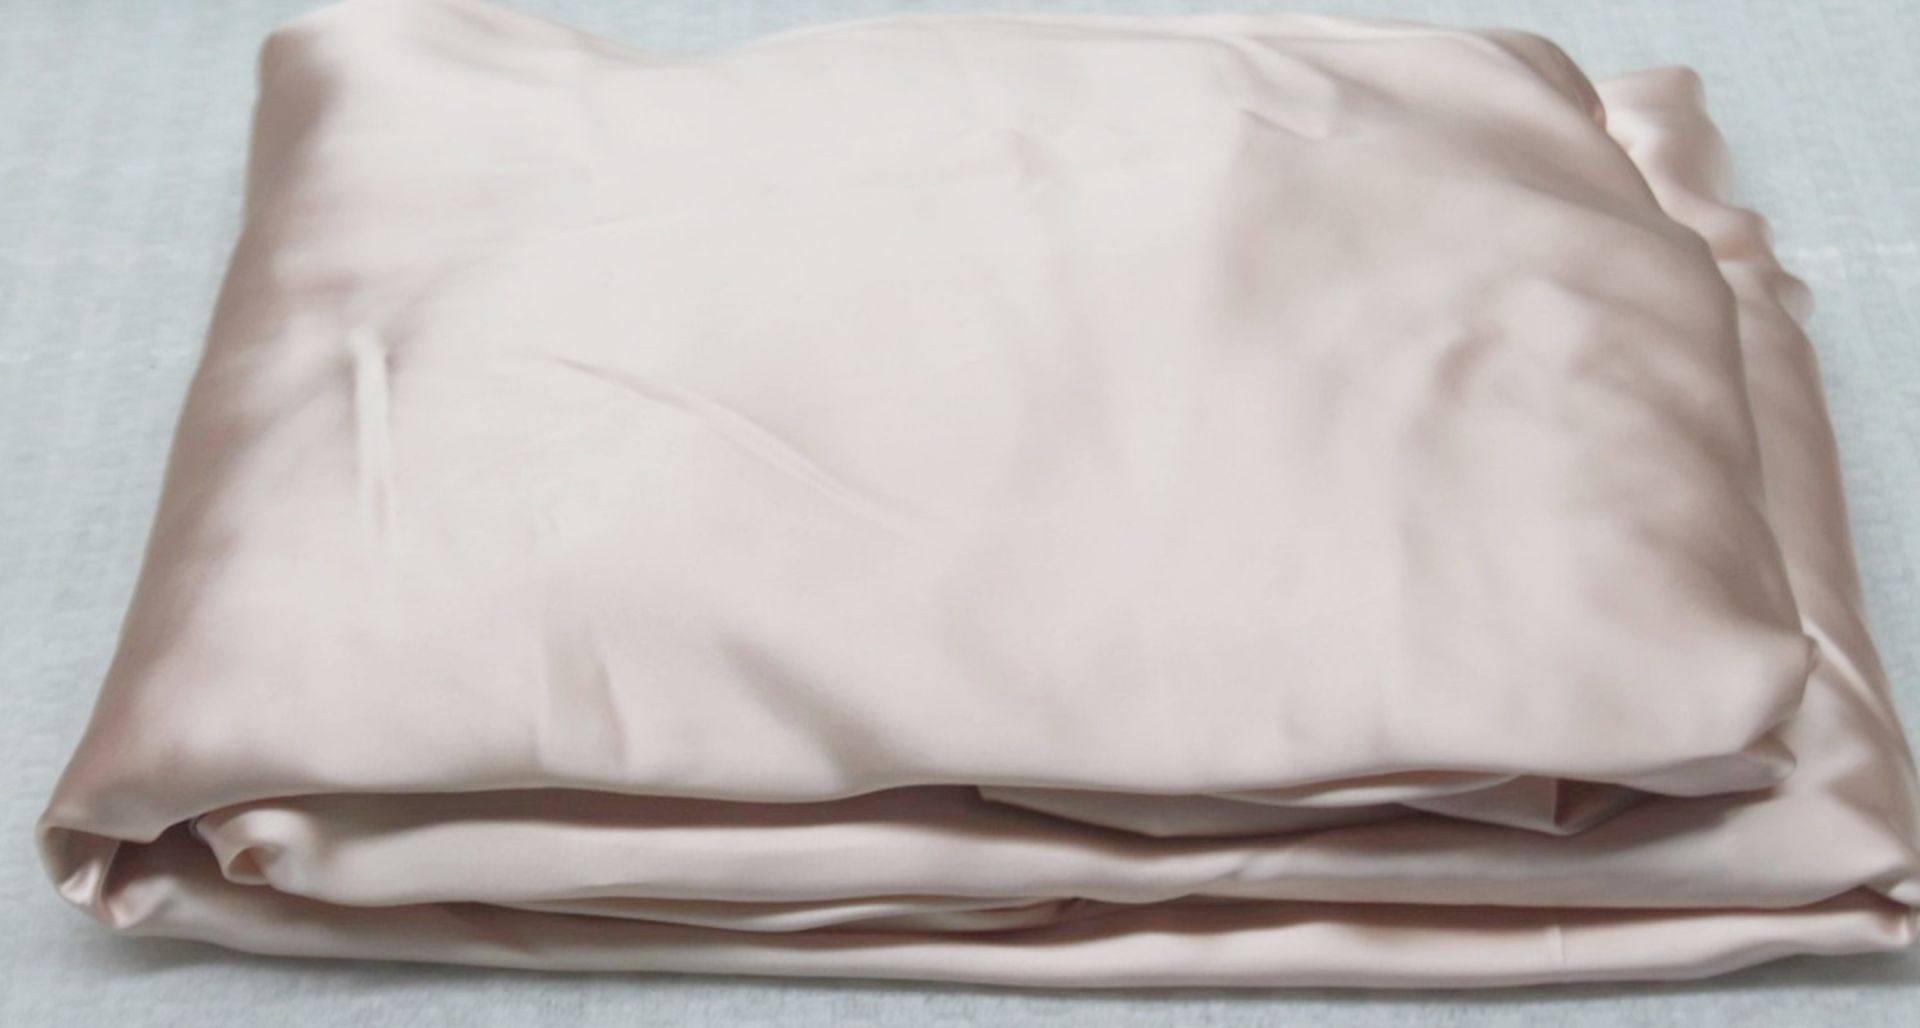 1 x GINGERLILY Luxury Silk Super King Fitted Sheet In Rose Pink - 180x200 - Original Price £389.00 - Image 5 of 5